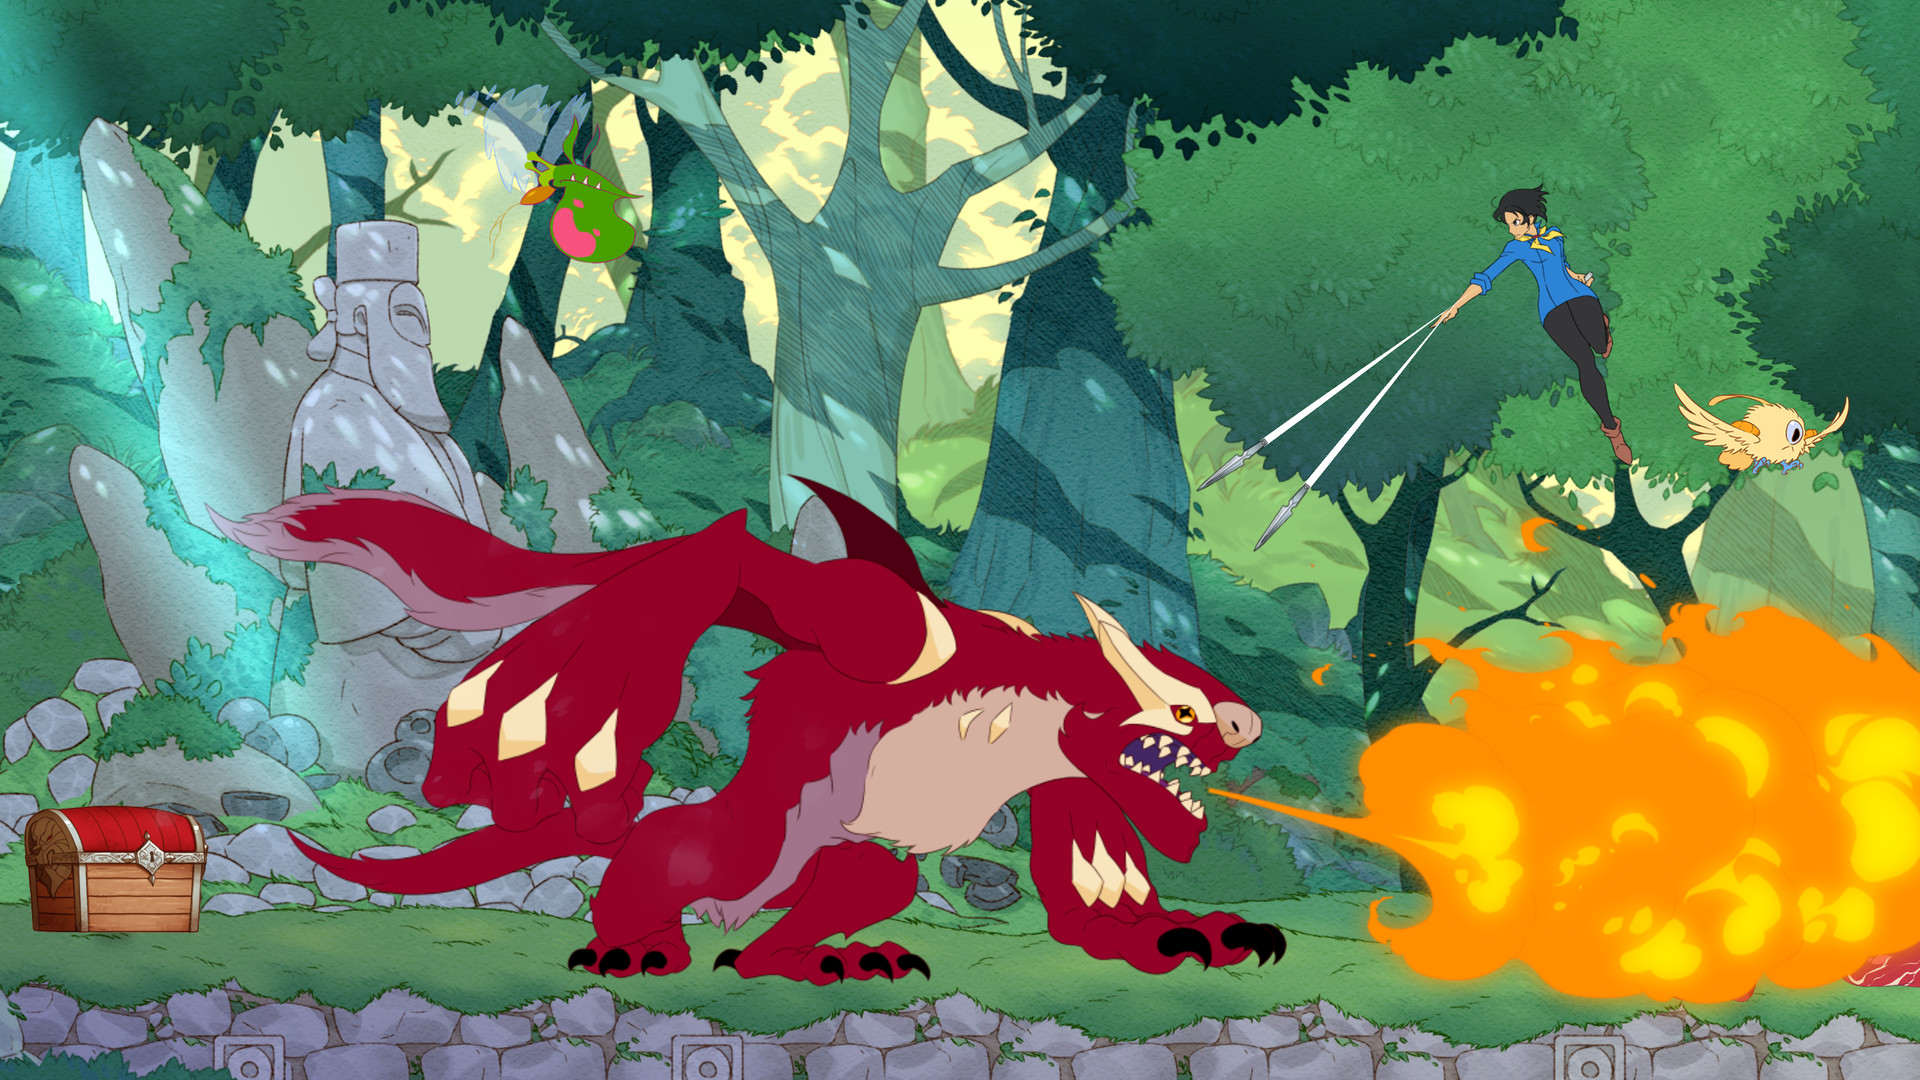 Best anime games: Battle Chef Brigade. Image shows a fearsome red furry creature breathing fire.